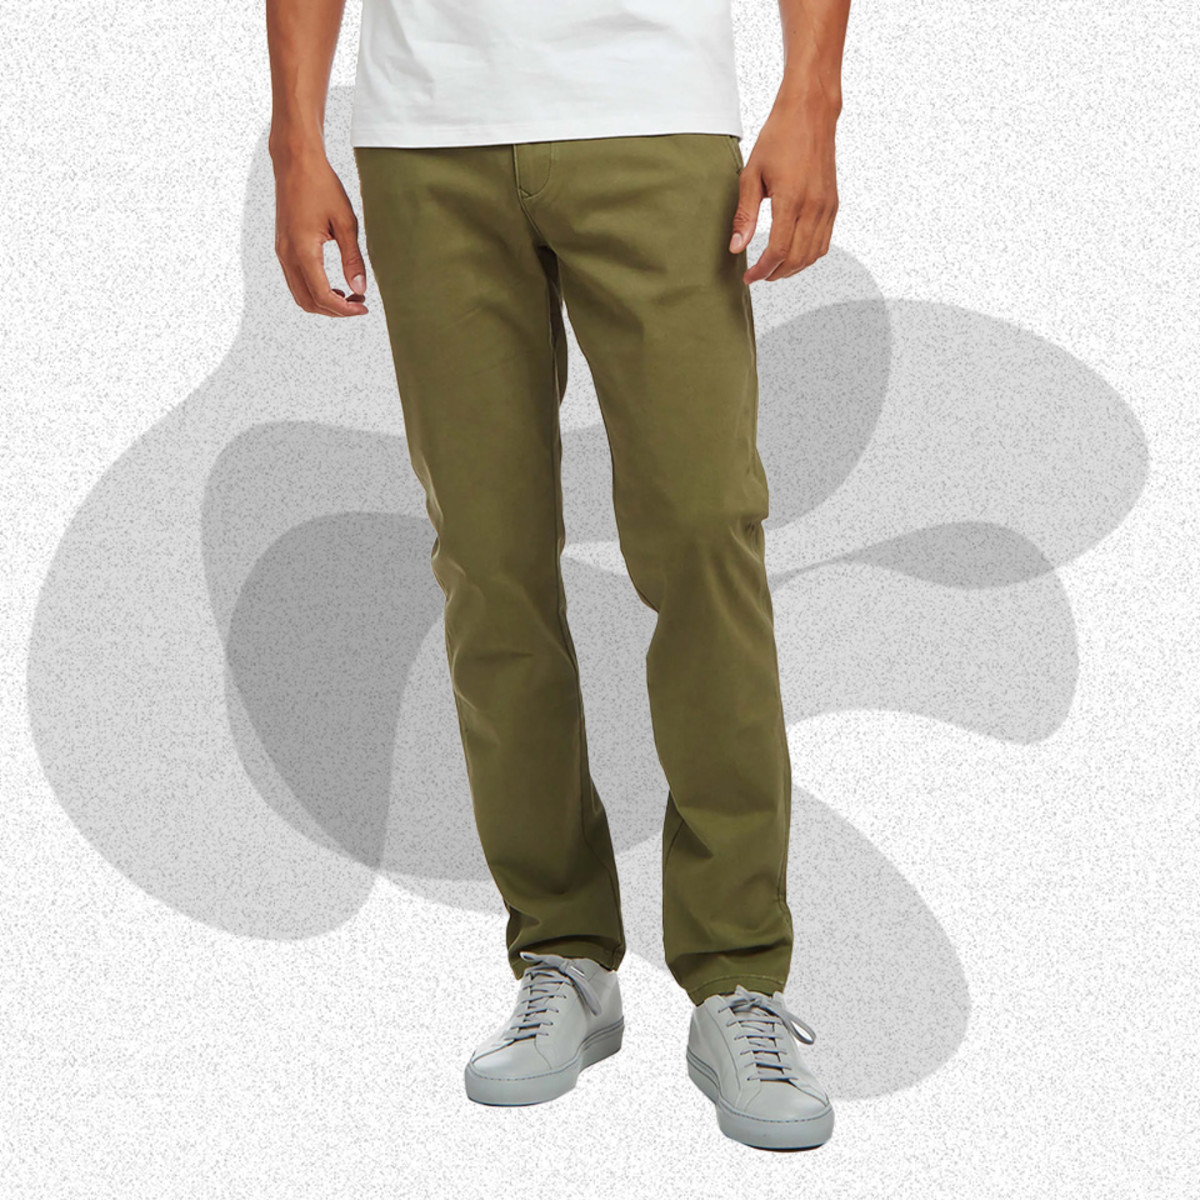 Brown Pants And T-shirt. White Shoes And Bicolor Bag. Stock Photo, Picture  and Royalty Free Image. Image 57793722.